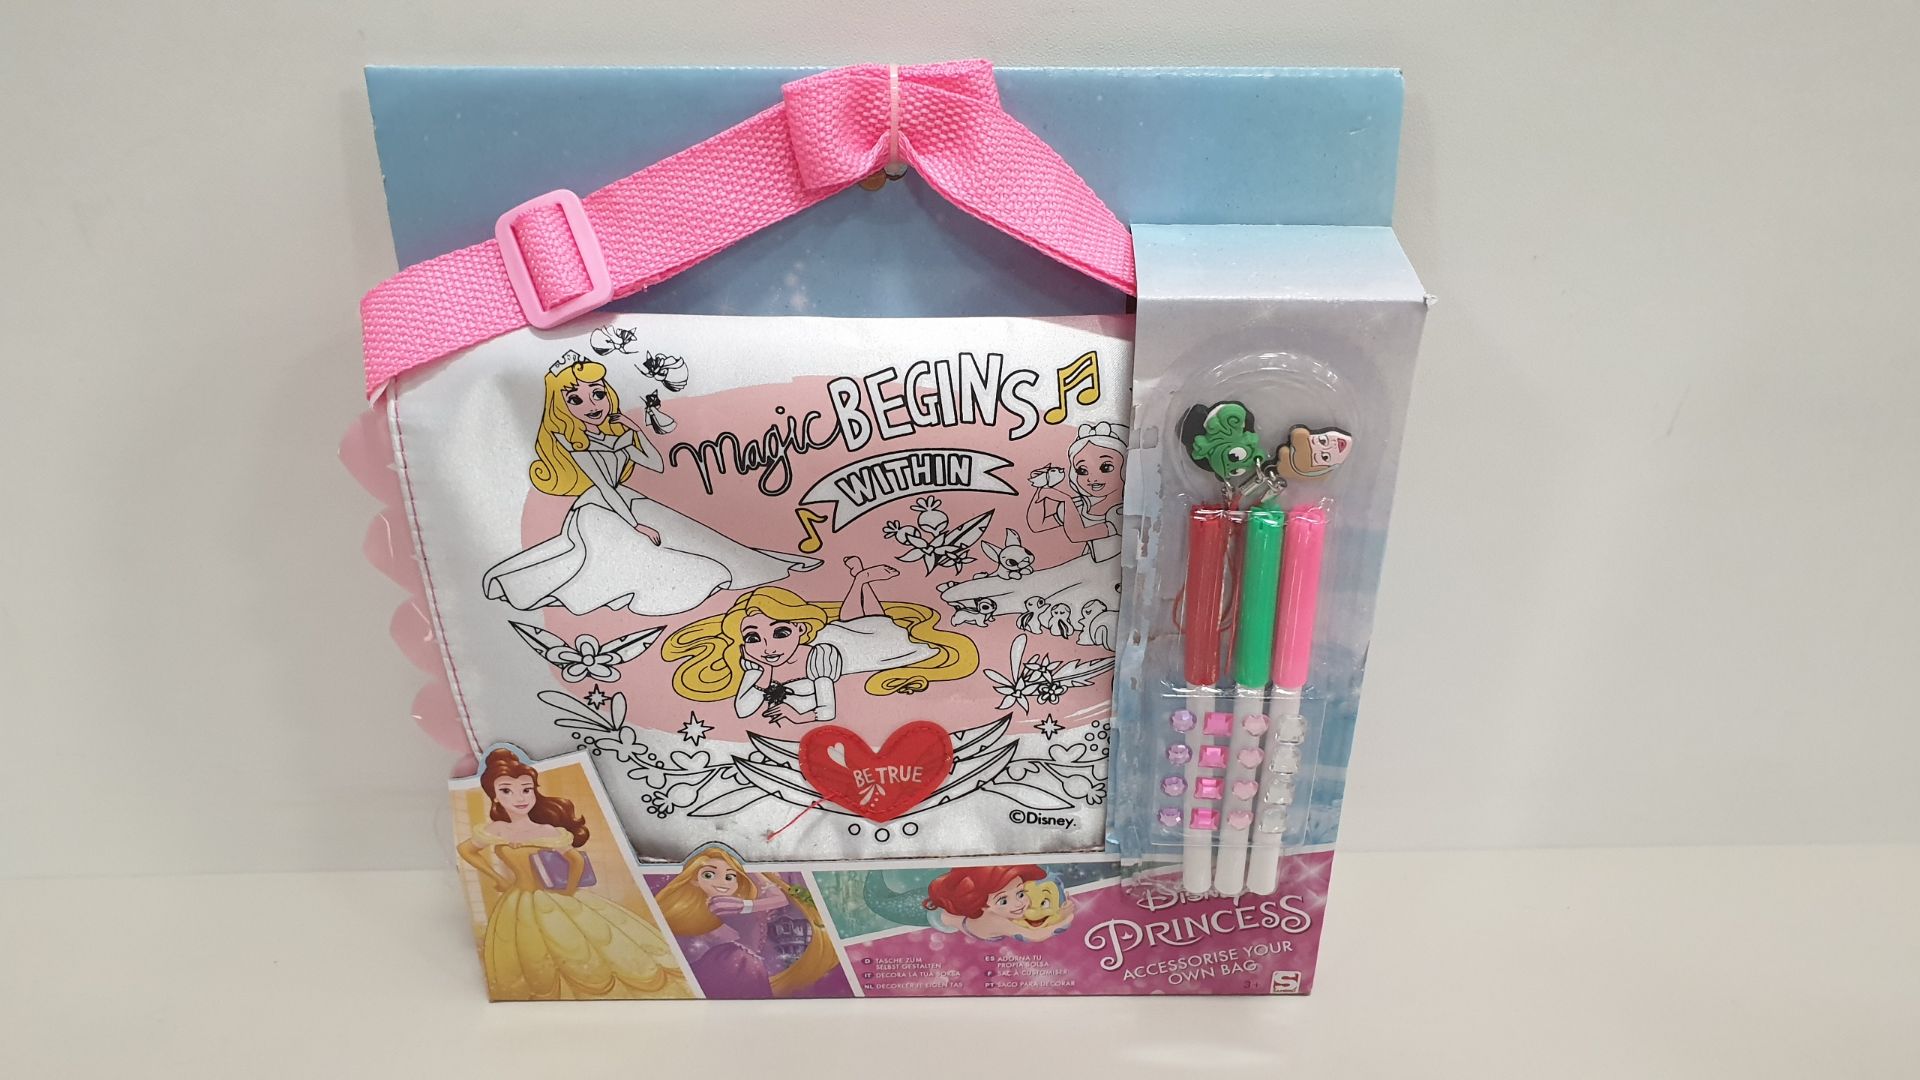 40 X BRAND NEW DISNEY PRINCESS ACCESSORISE YOUR OWN BAG COMES WITH FELT TIPS AND GEMS IN 5 BOXES